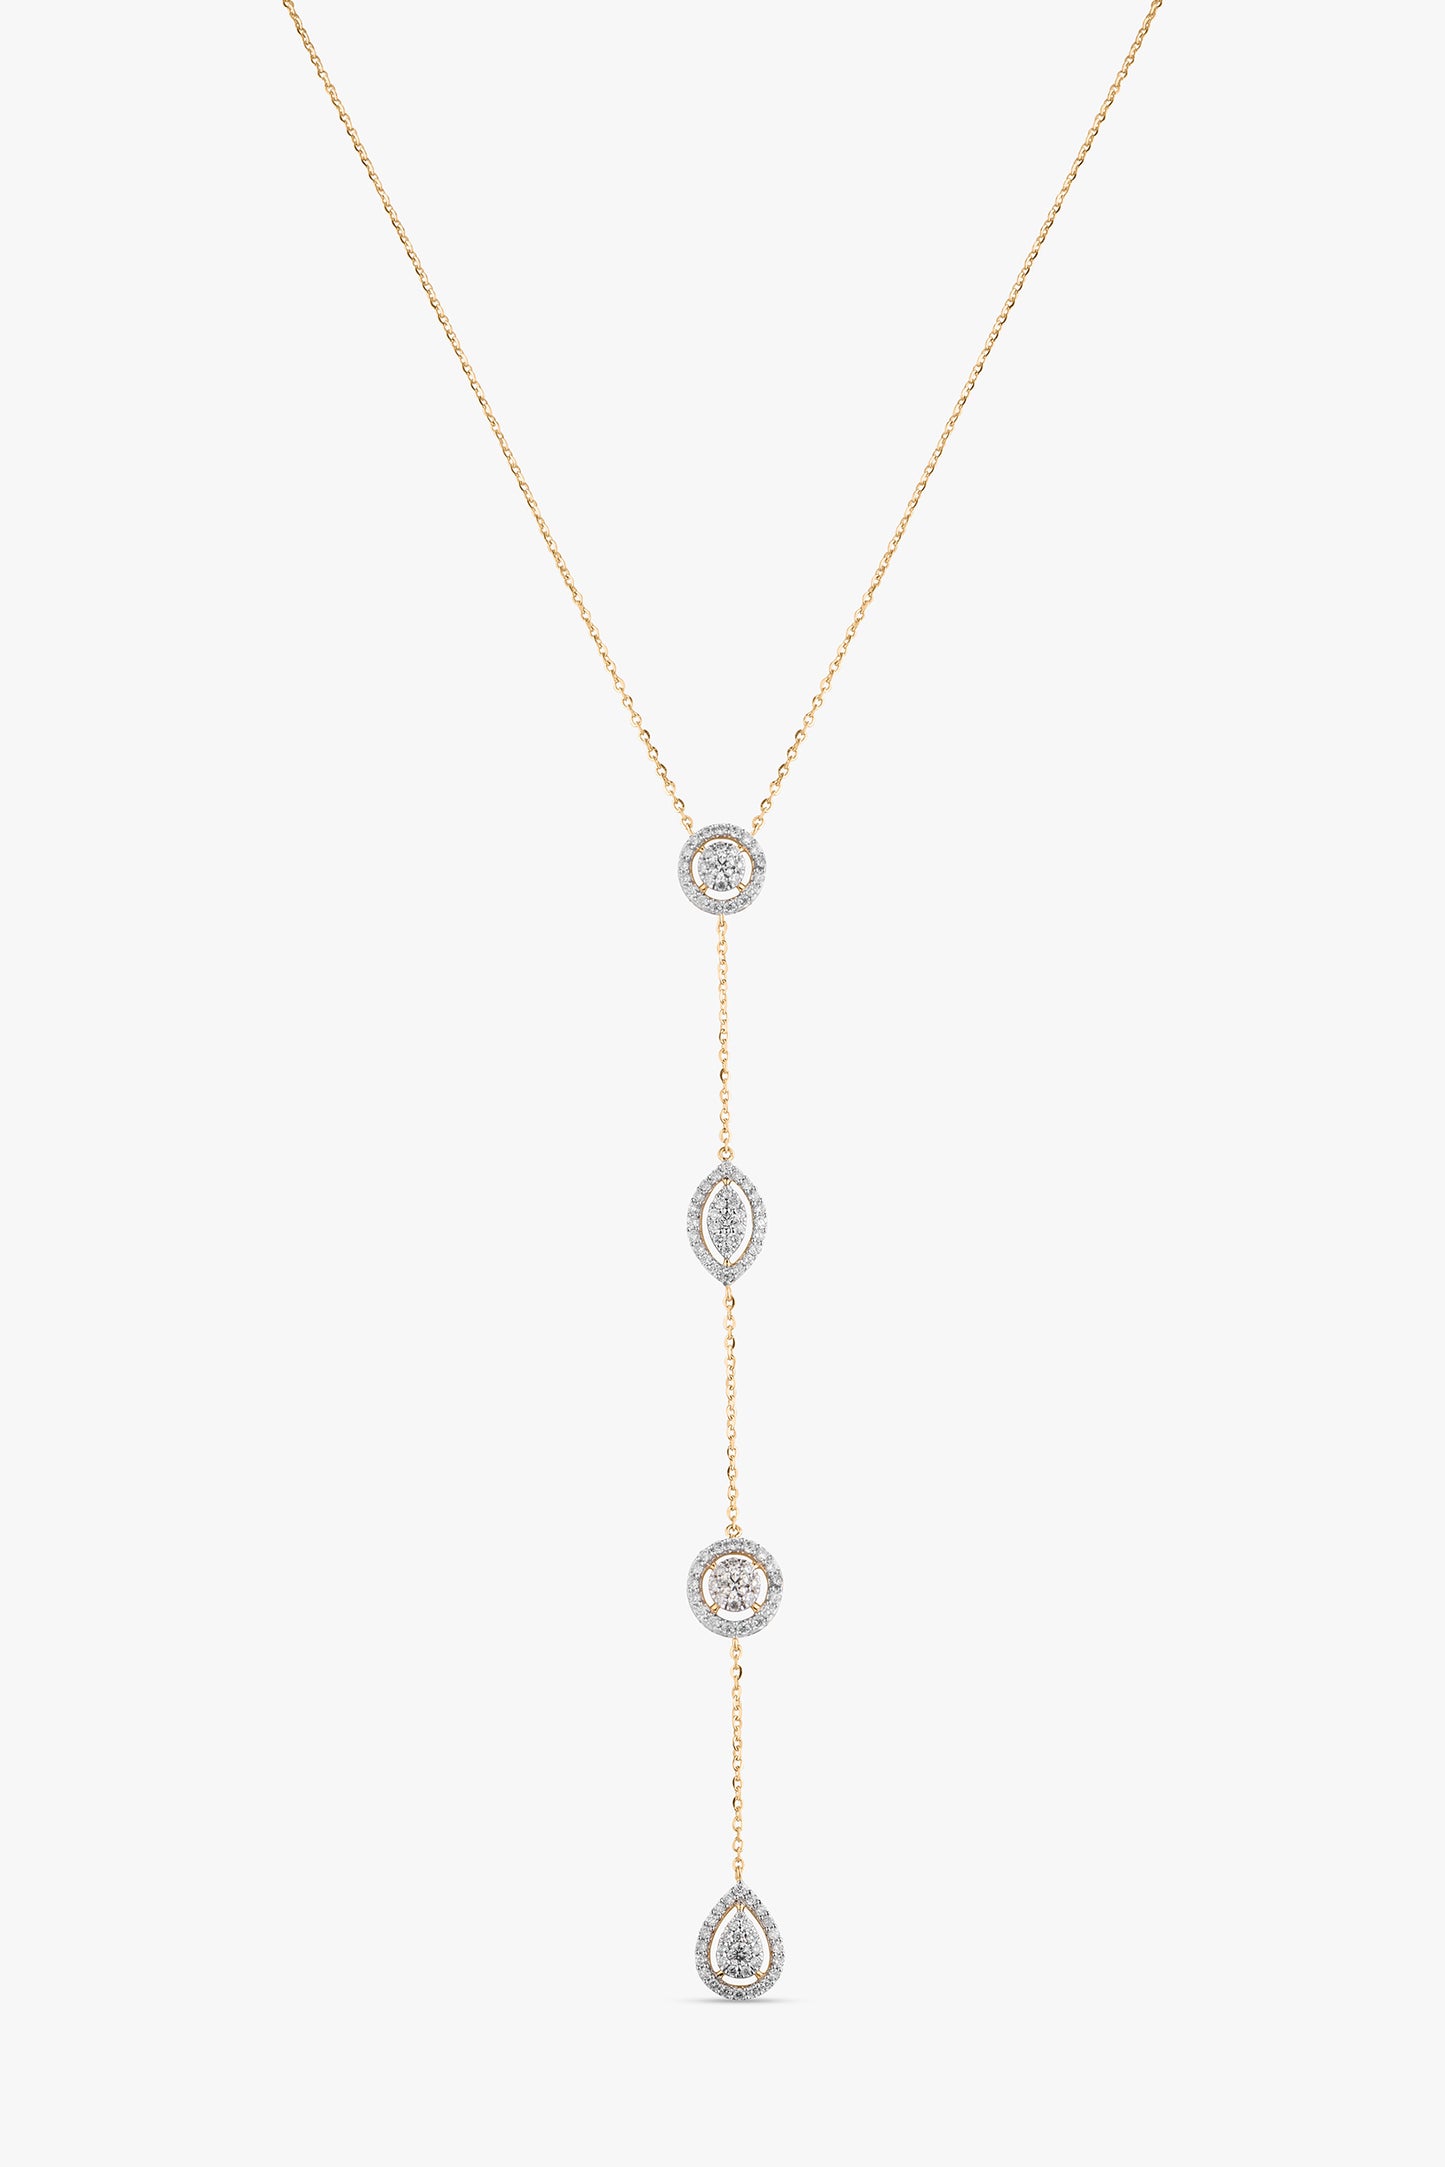 Zoe Cleavage Necklace